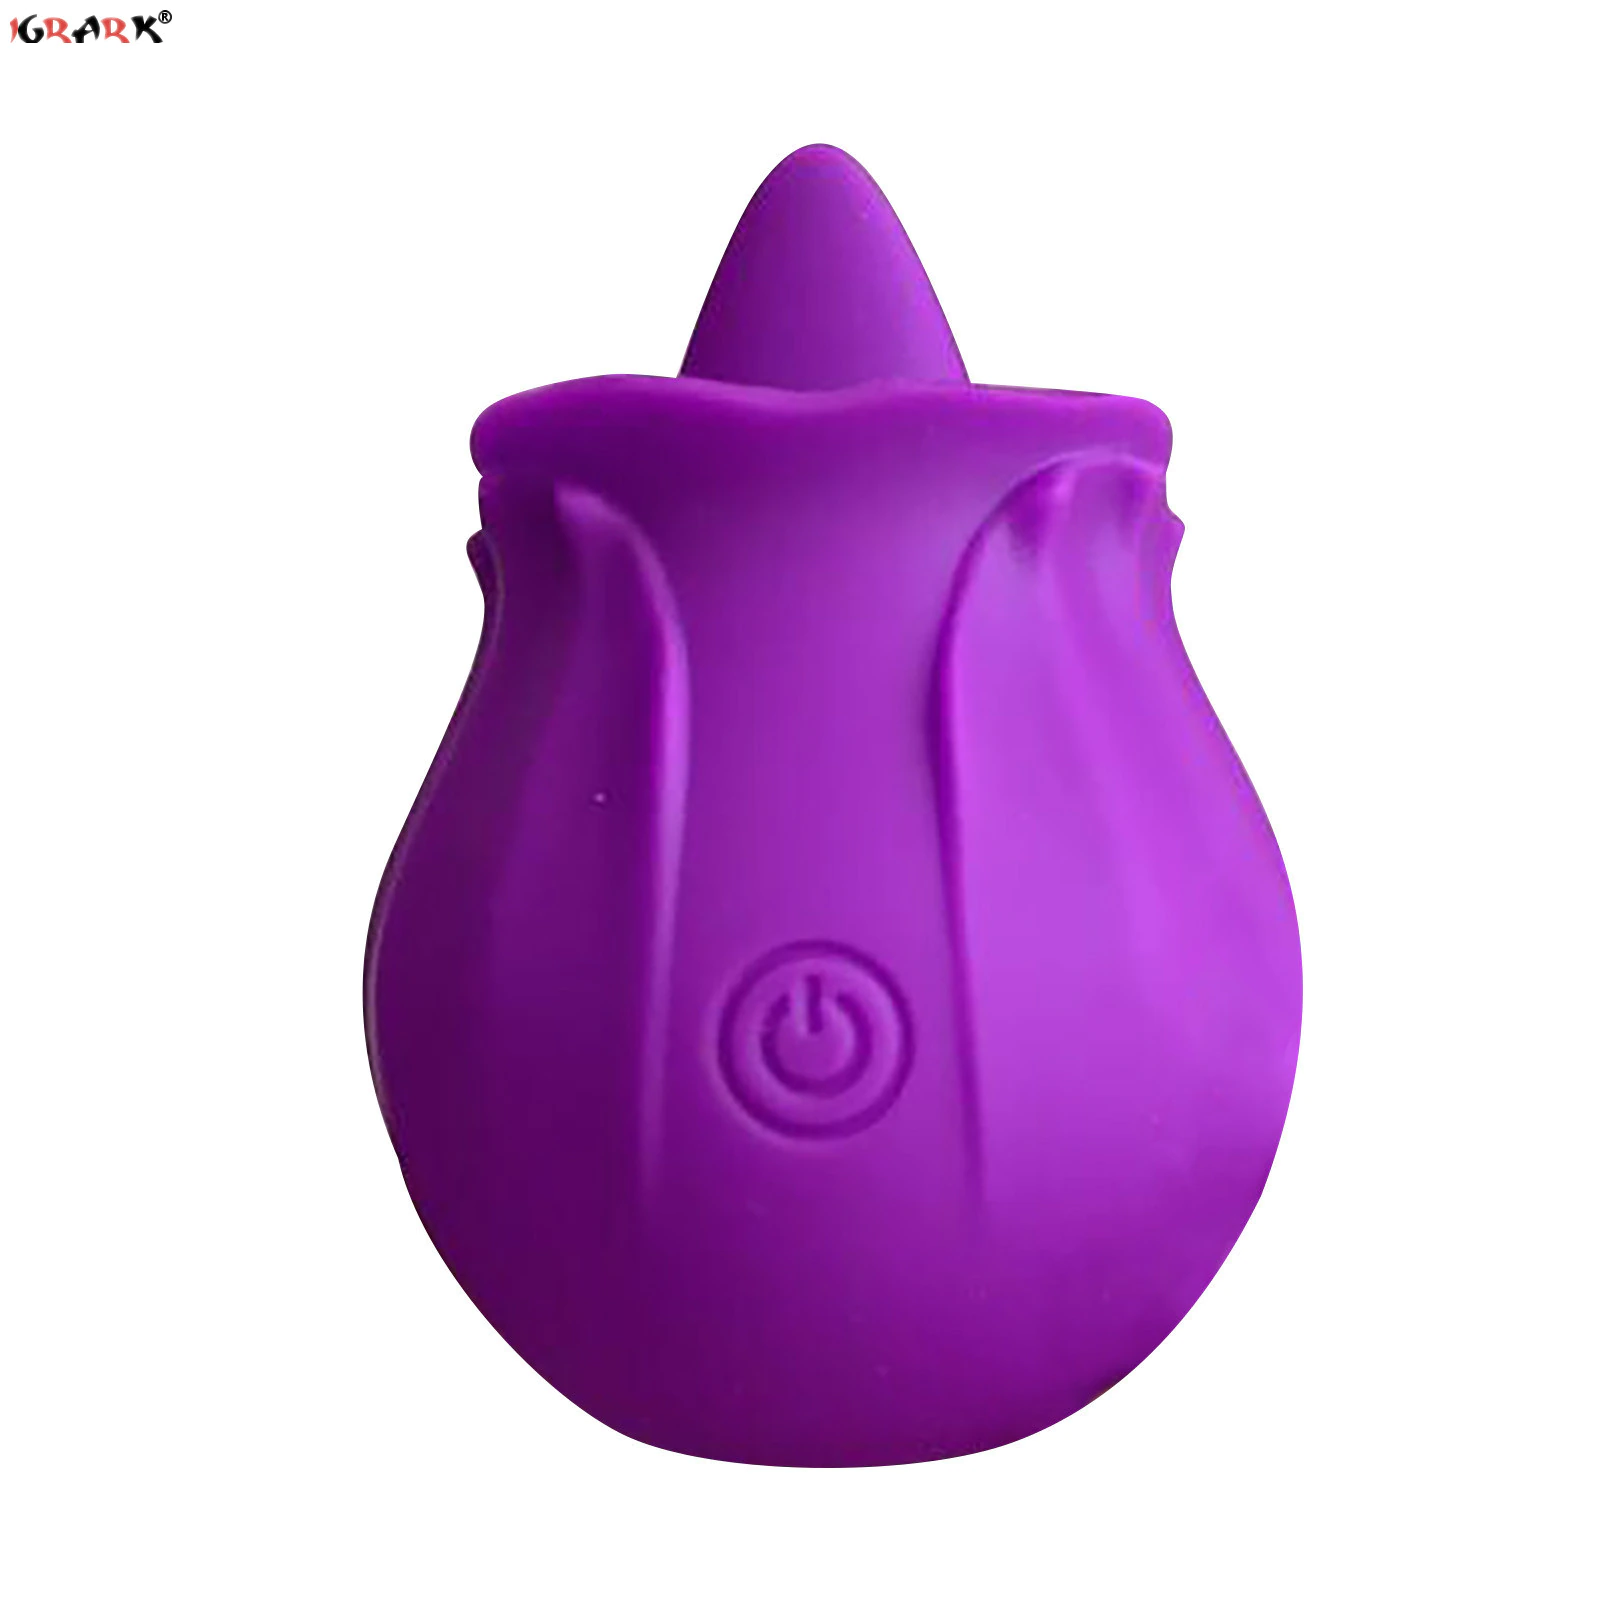 The Rose Toy with Tongue in Purple